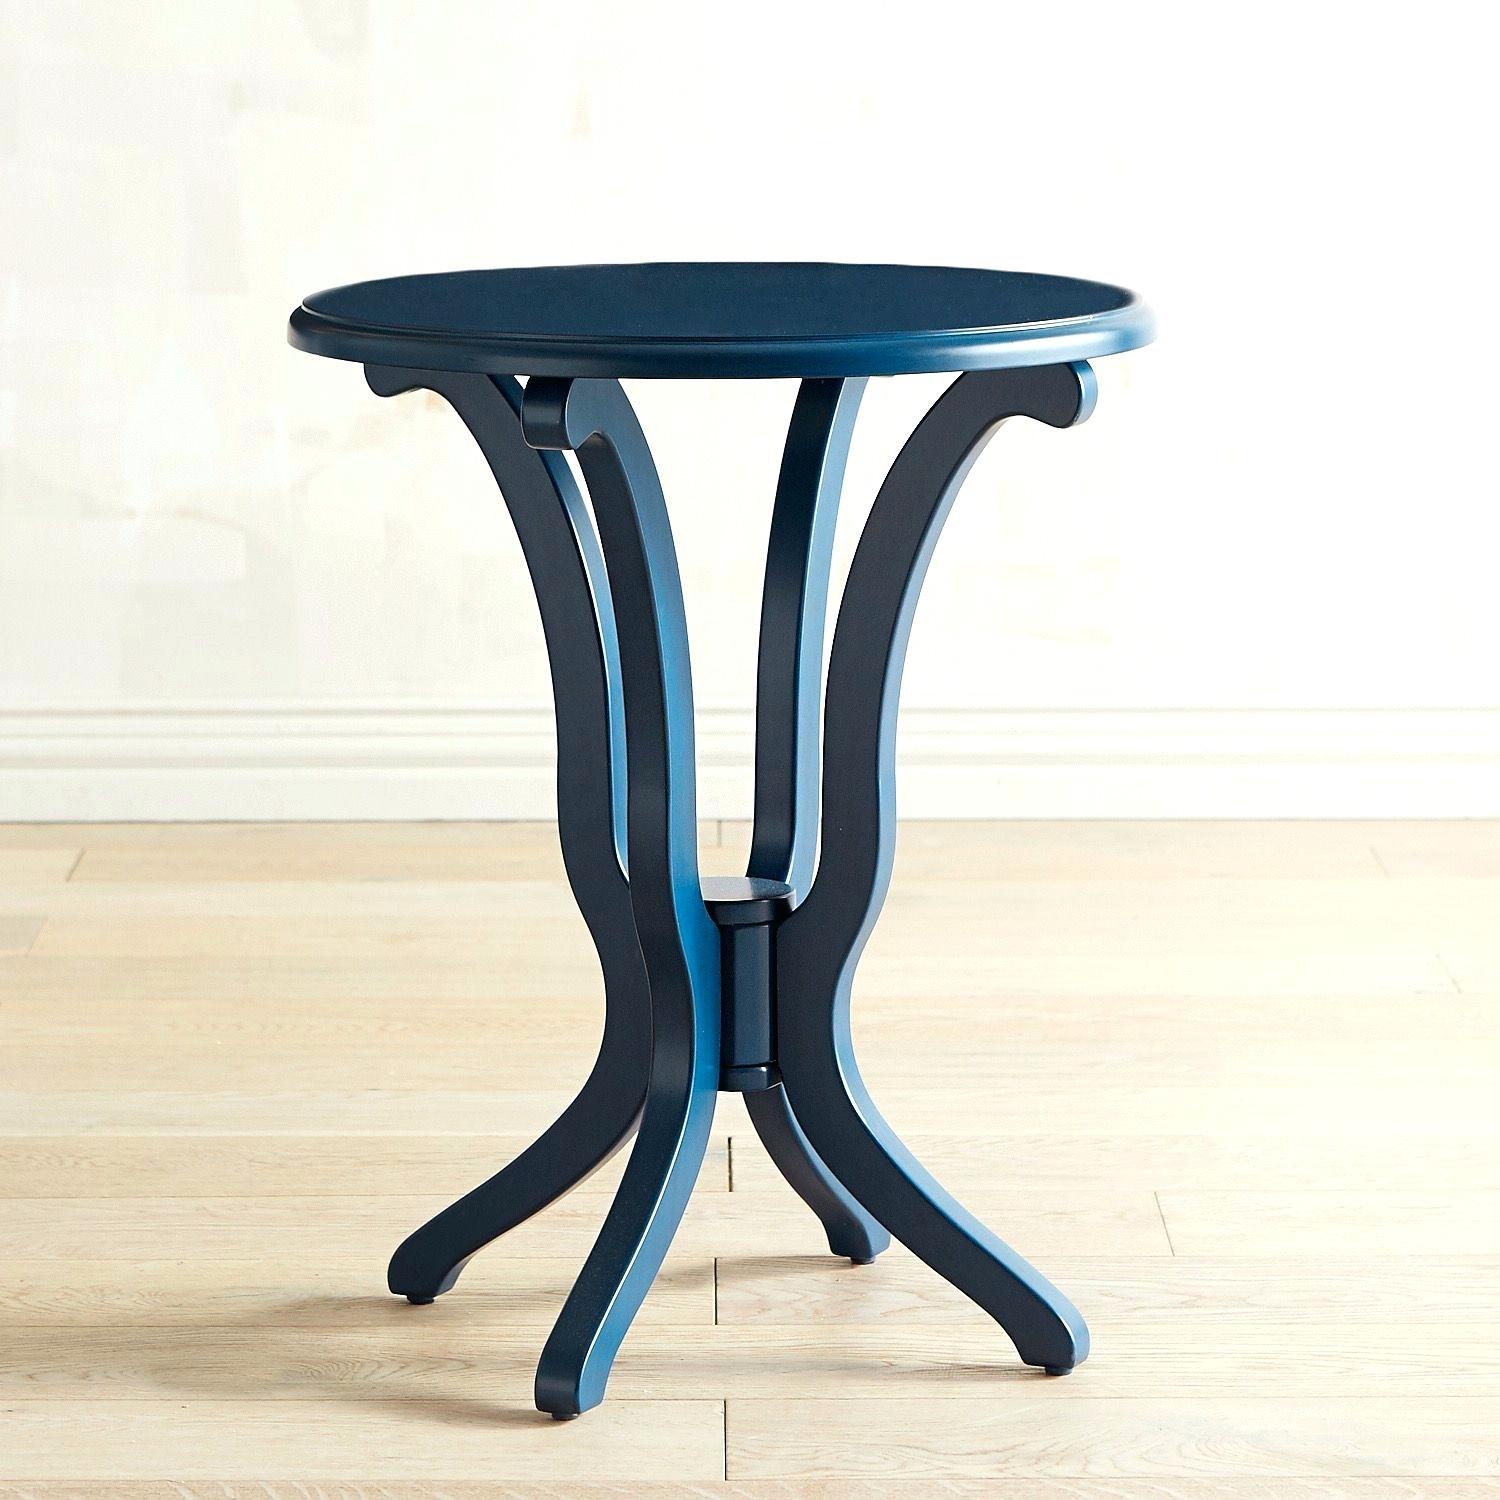 blue accent table royal sportaround save this item dark ott coffee decorative inch round covers lucite sofa diy farmhouse ashley furniture bar stools pier imports very thin